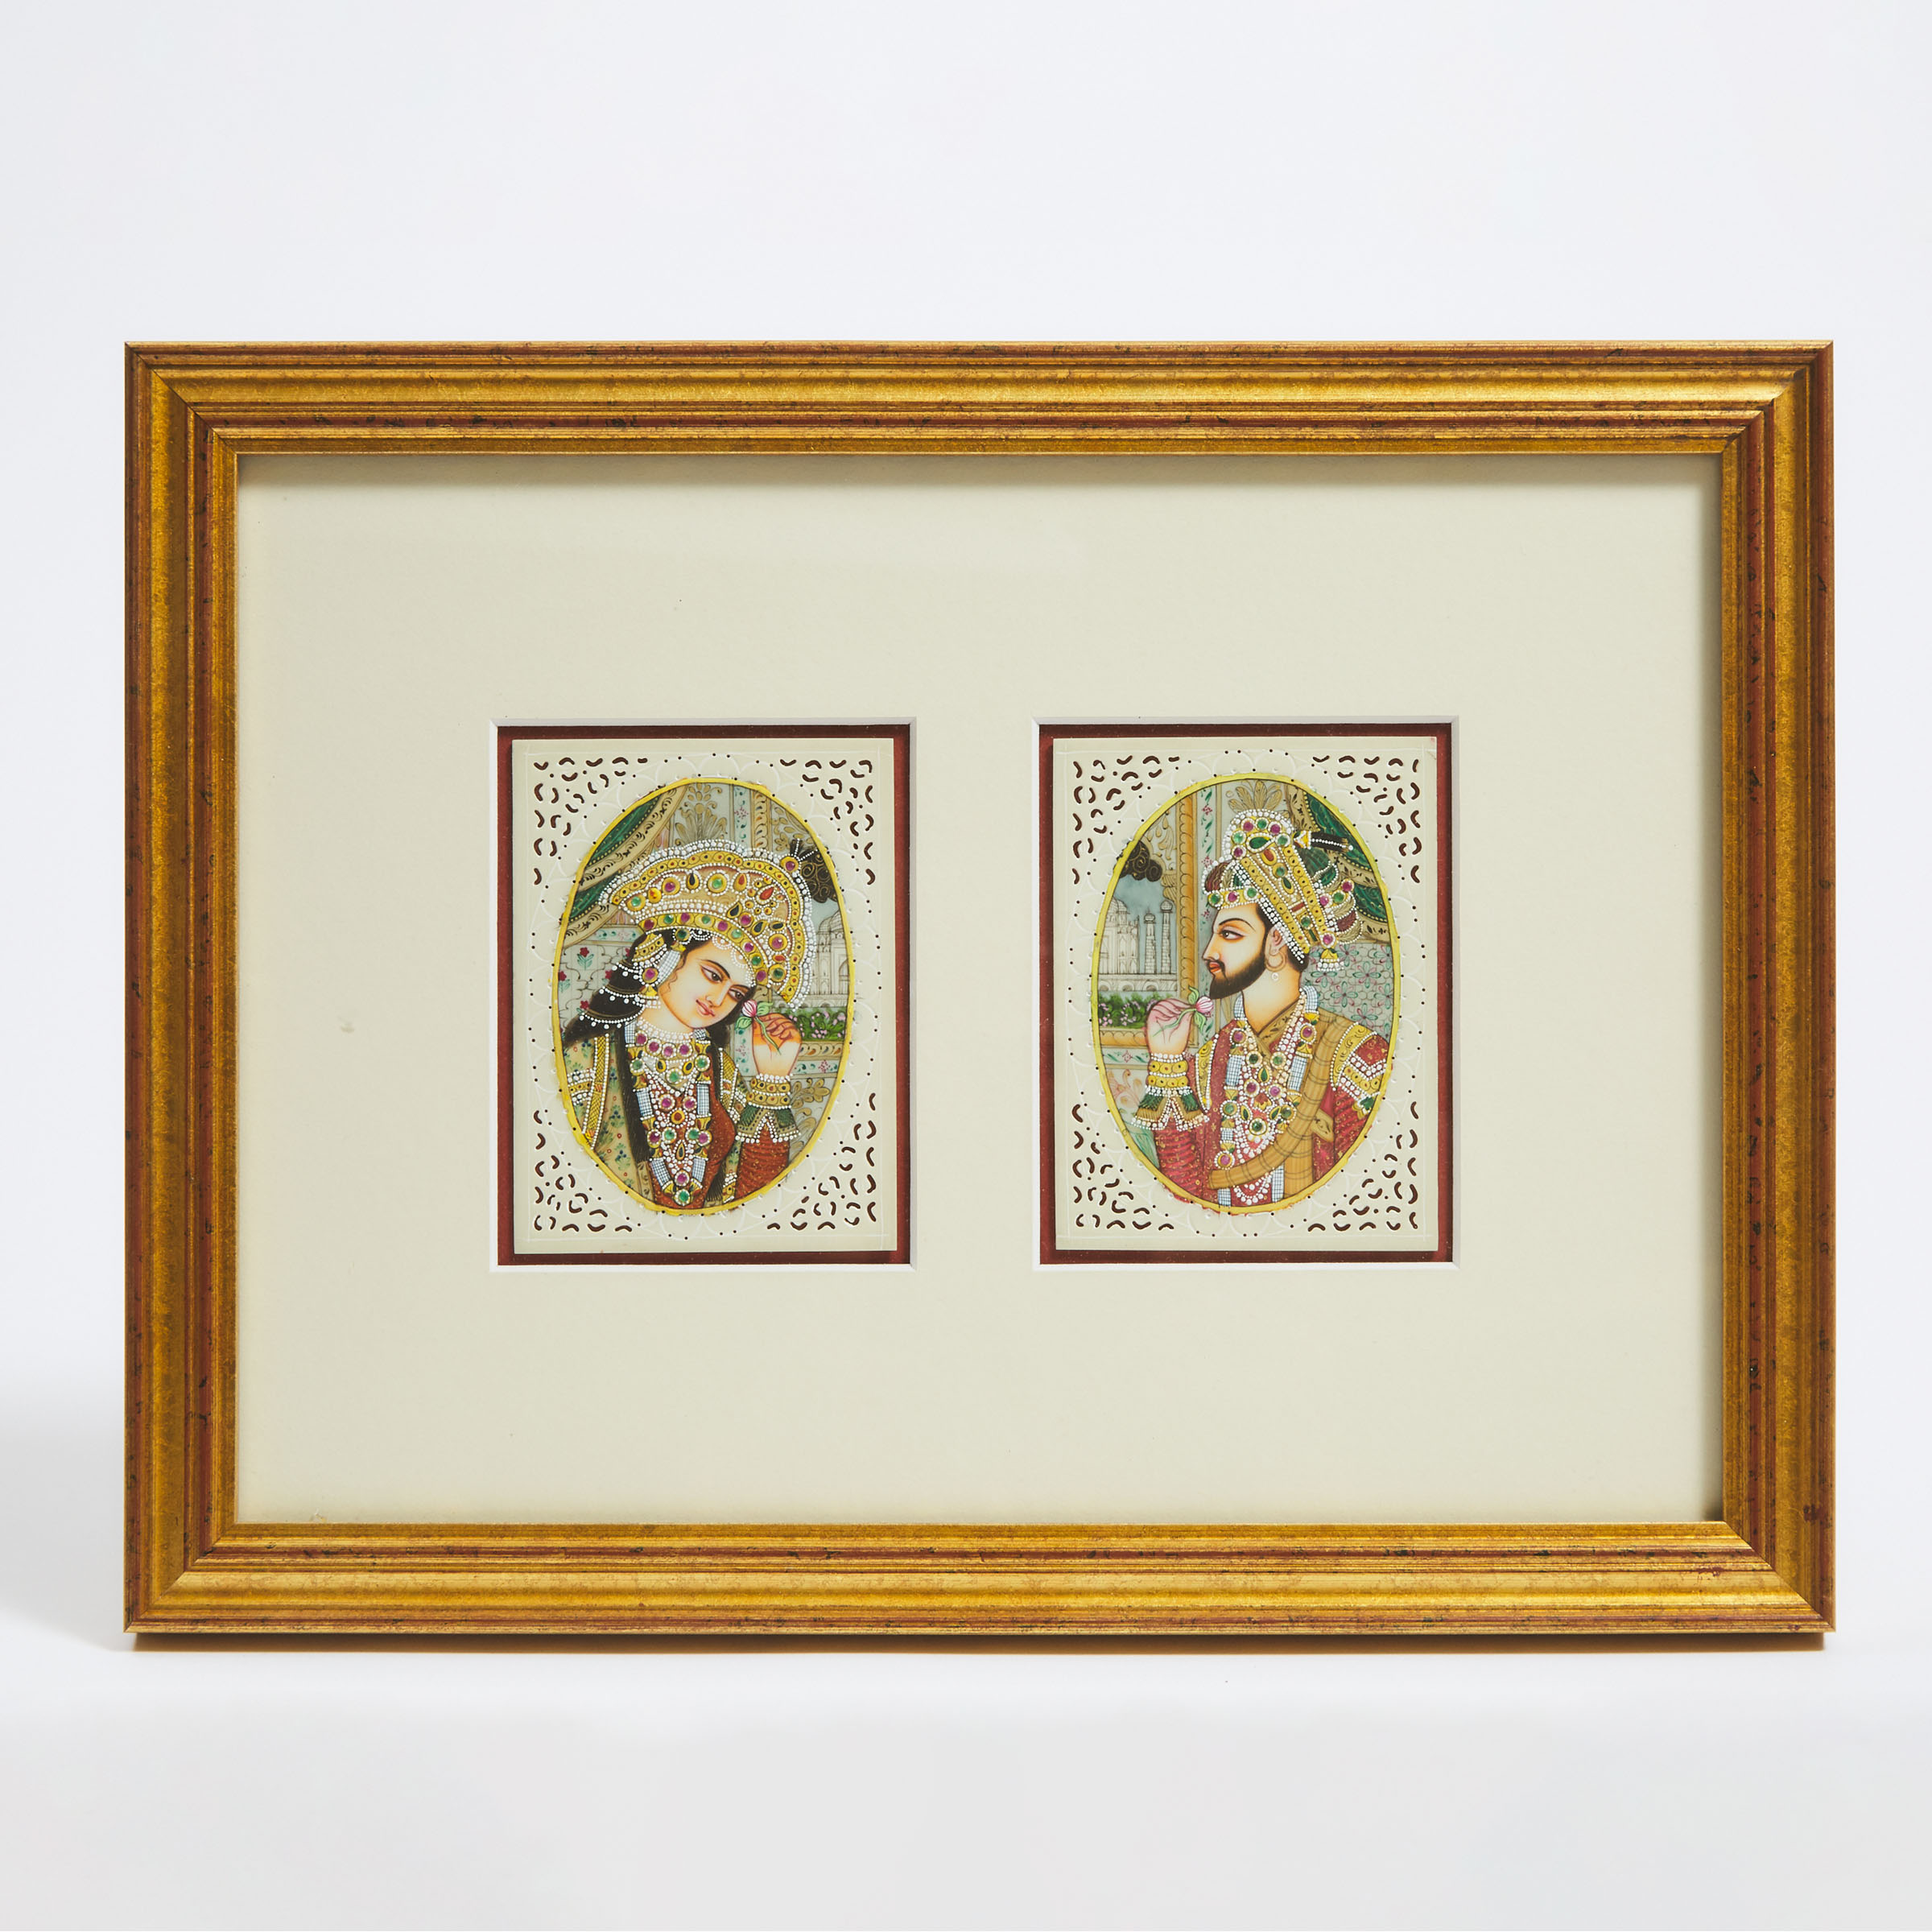 A Framed Indian Miniature Portrait of a Prince and Princess With the Taj Mahal, 20th Century